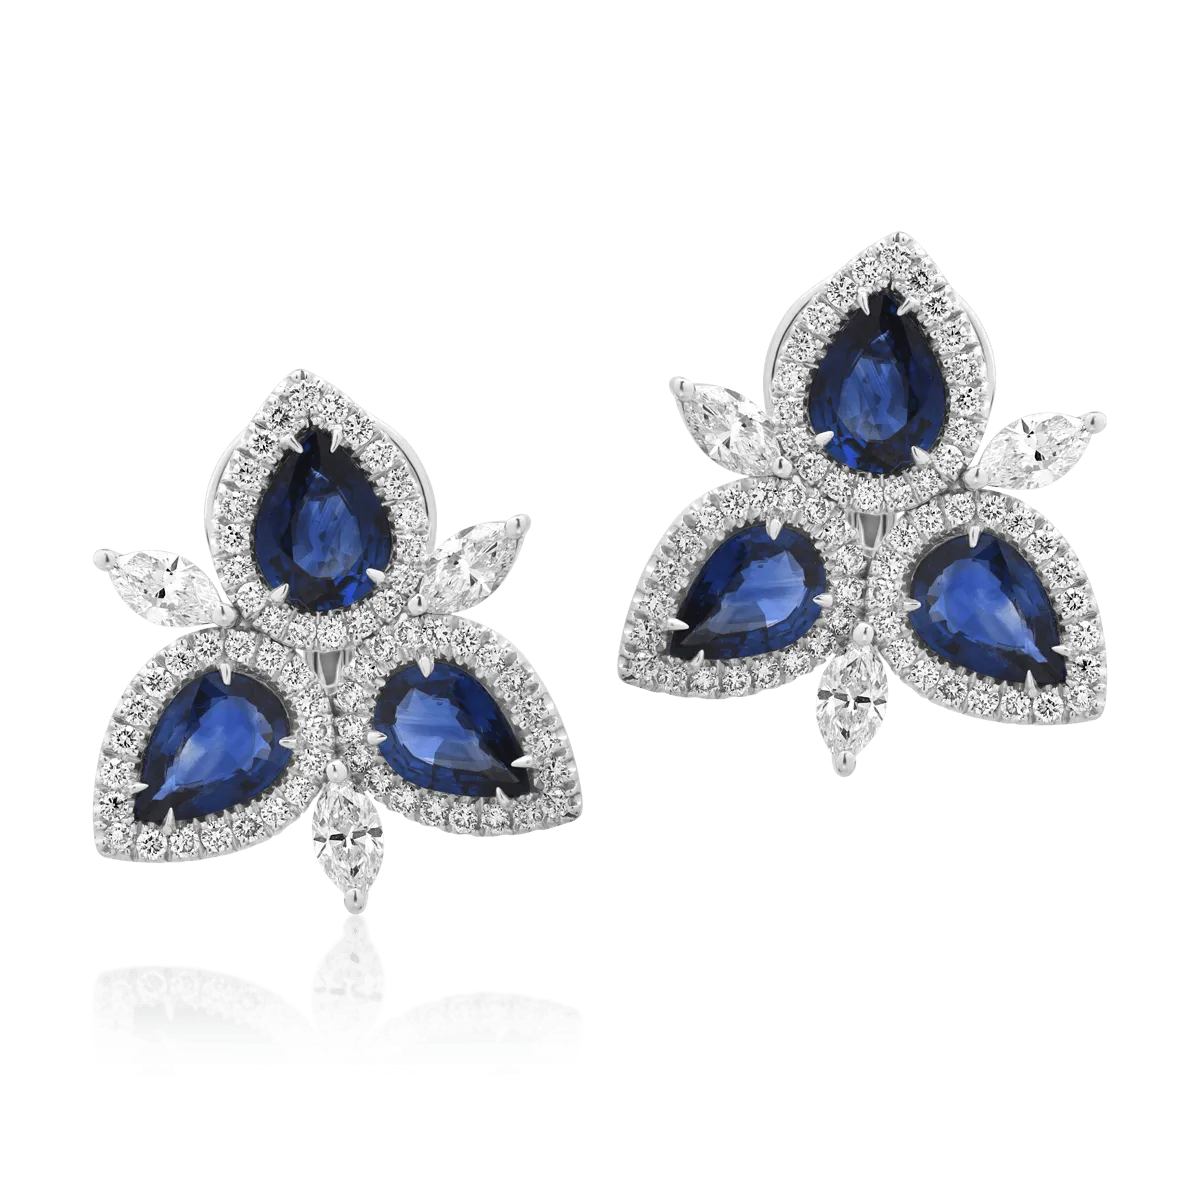 18K white gold earrings with sapphires of 6.84ct and diamonds of 2.4ct